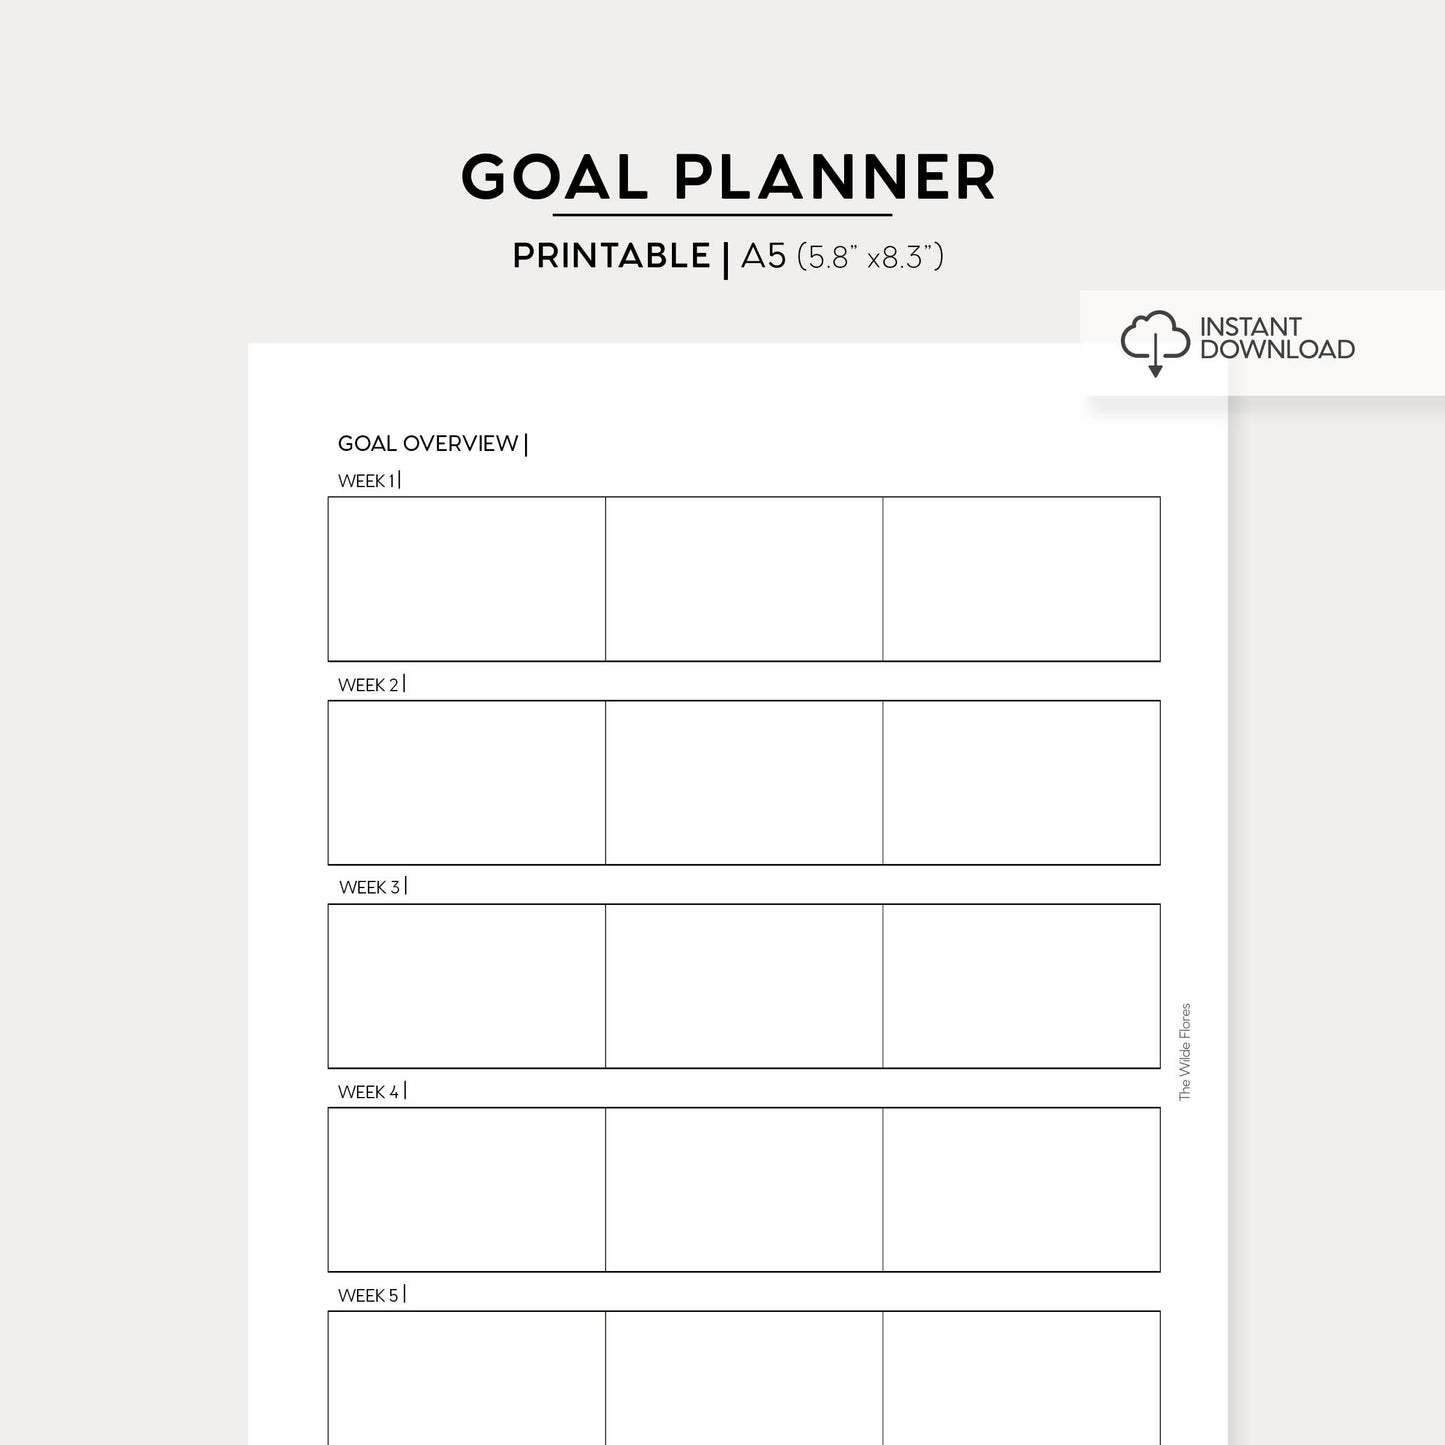 Top Three Weekly Goal Planner: A5 Size Printable